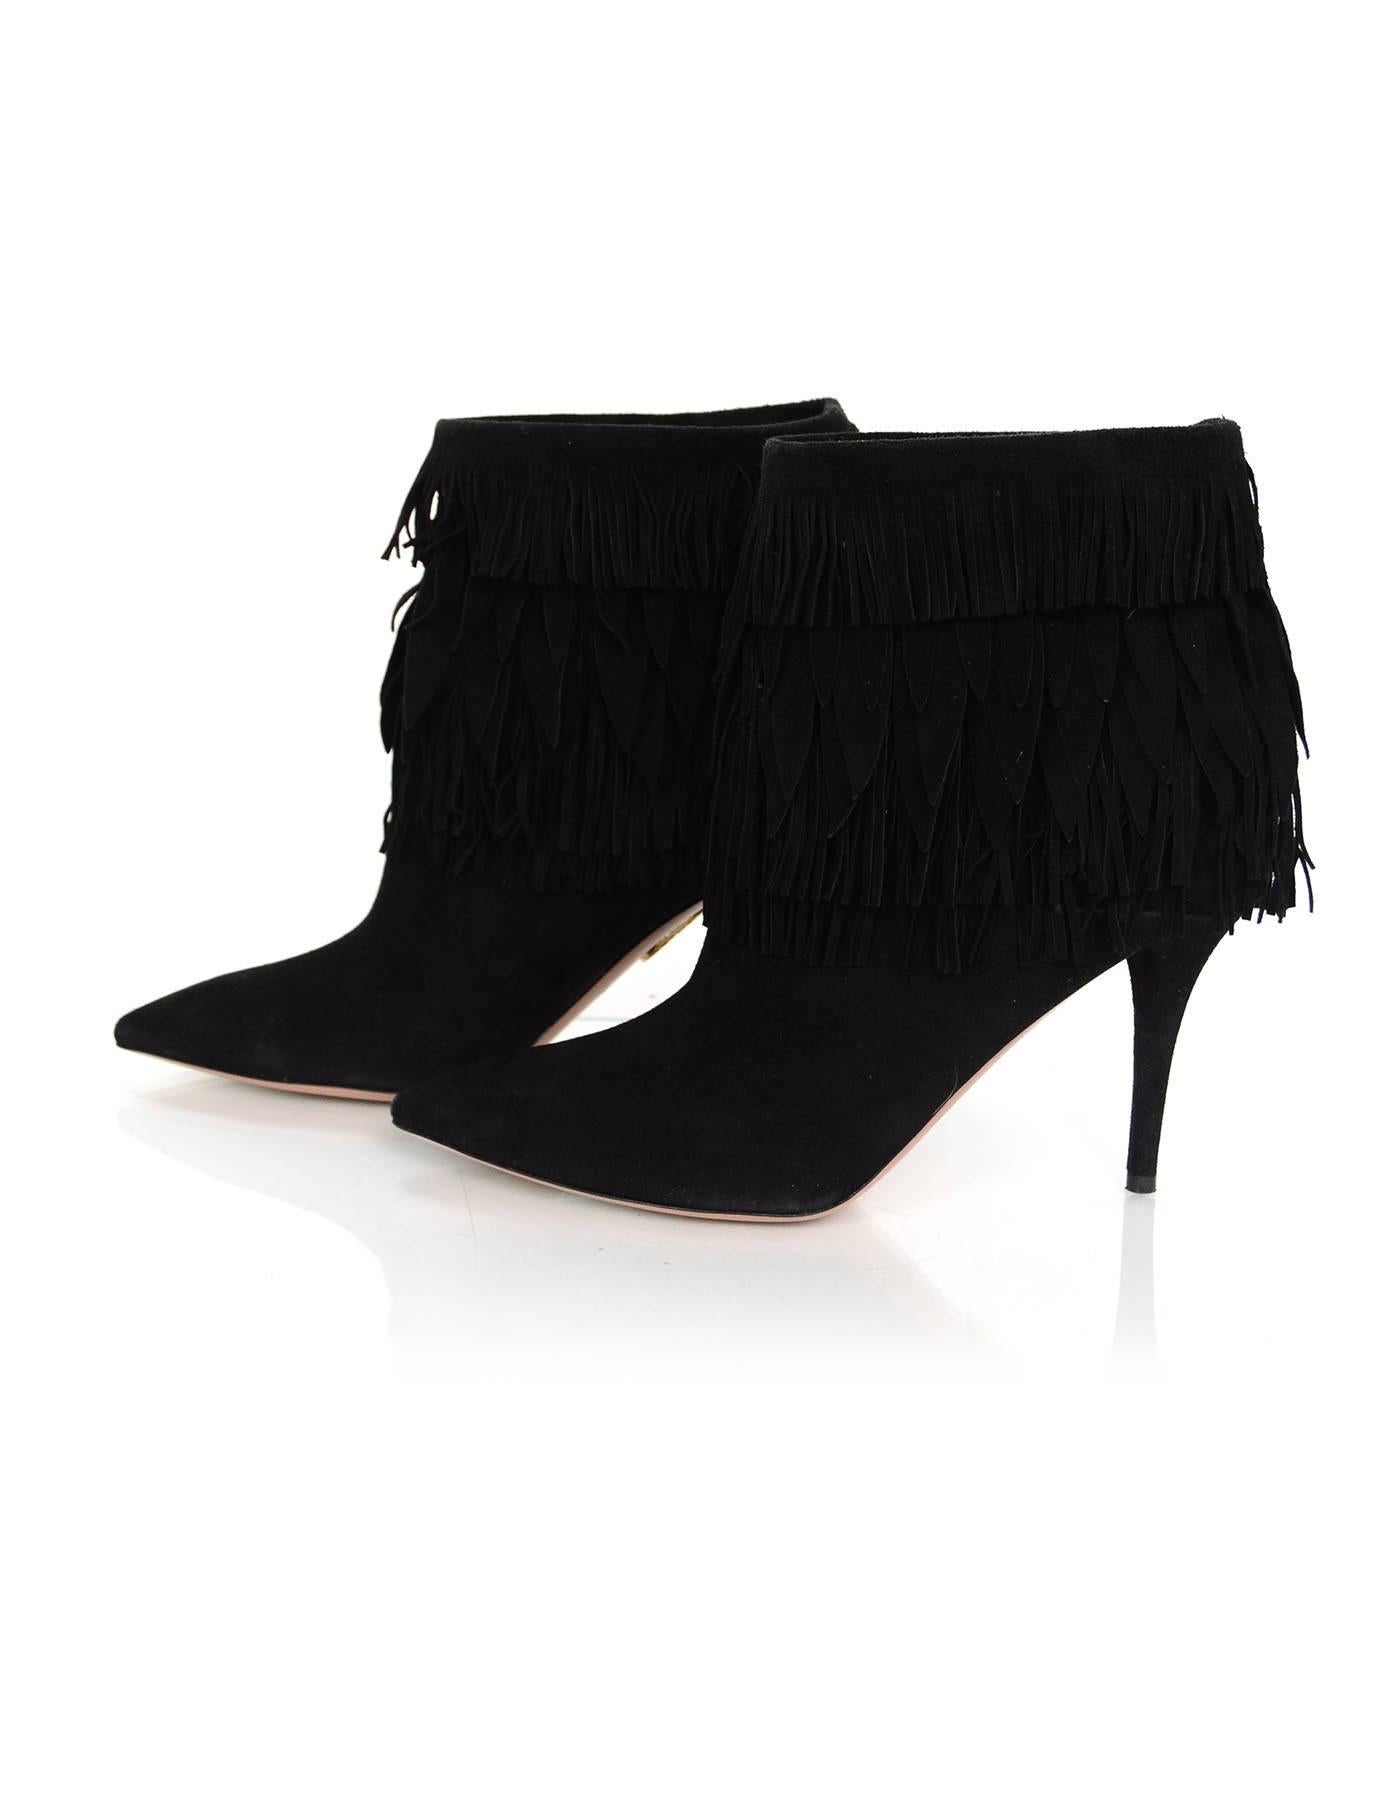 100% Authentic Aquazzura Sasha Black Fringe Bootie Sz 40. Features tiered black fringe, pointy toe and stiletto heel.

Made In: Italy
Color: Black
Materials: Suede
Closure/Opening: Slide on
Sole Stamp: Aquazzura Firenze Vero Cuoio Made In